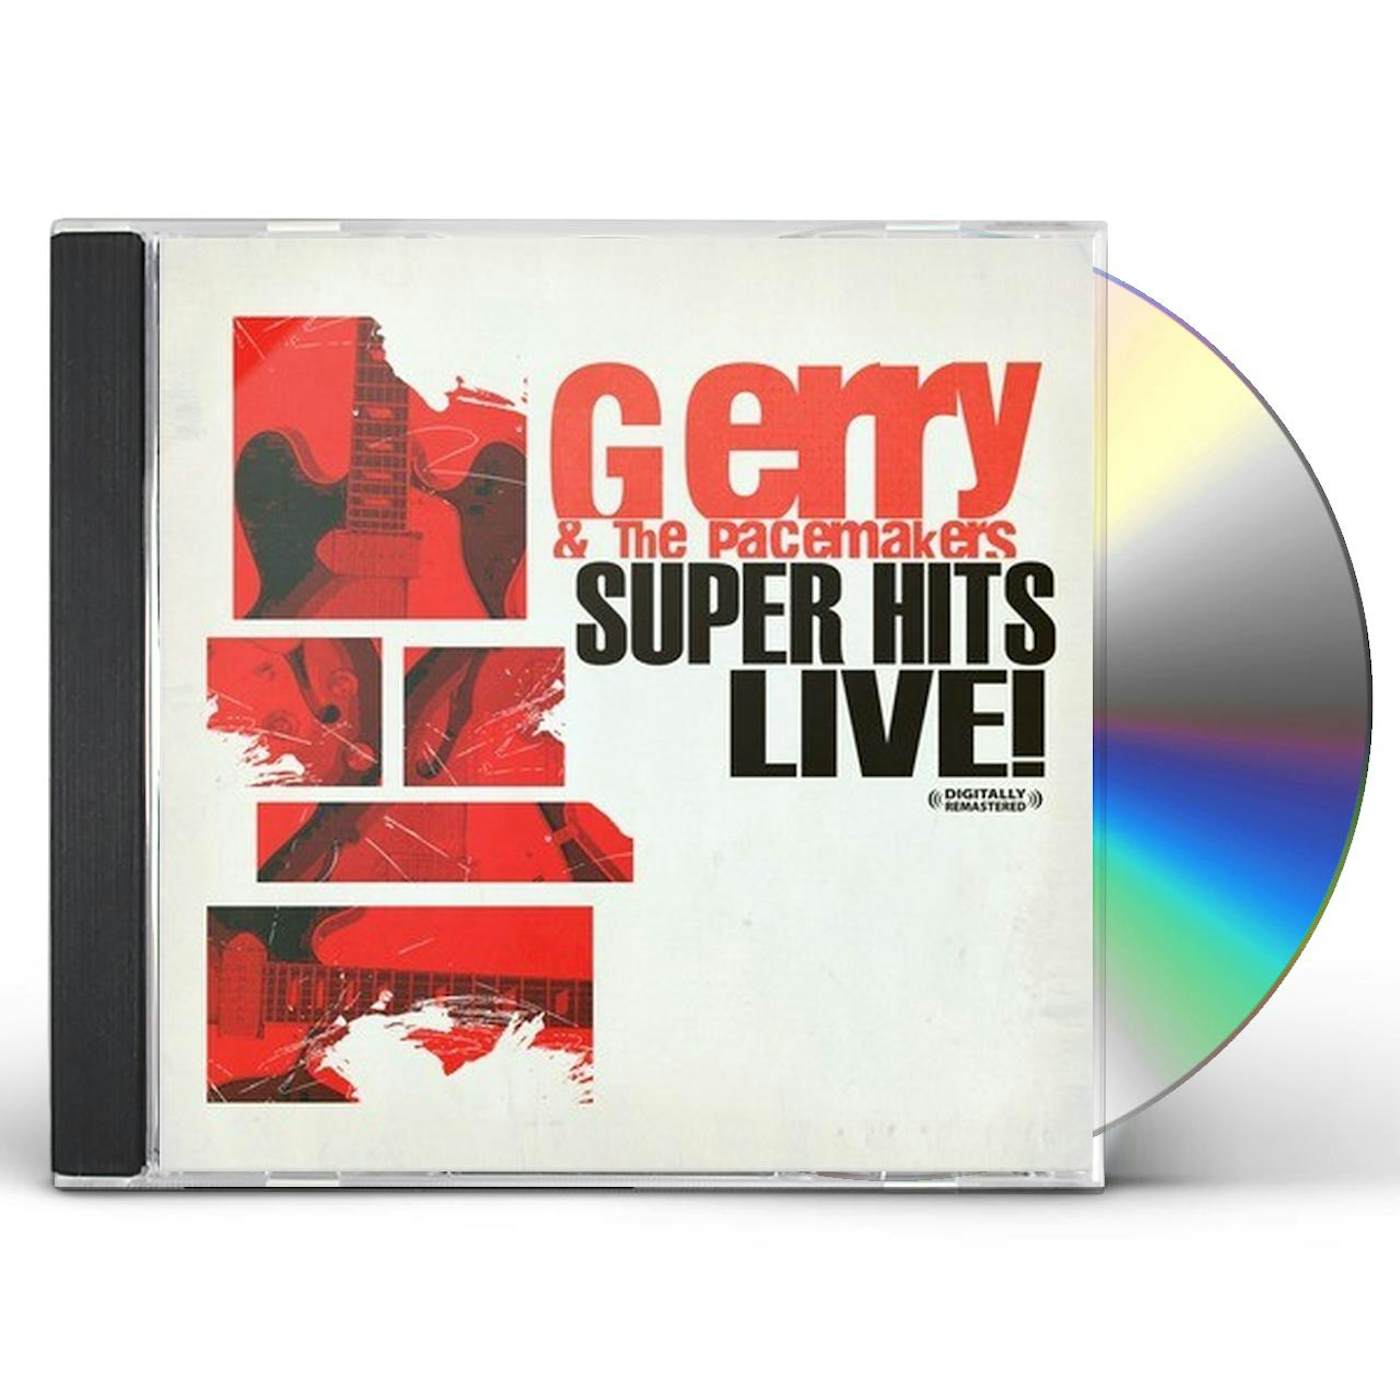 Gerry & The Pacemakers SUPER HITS LIVE CD